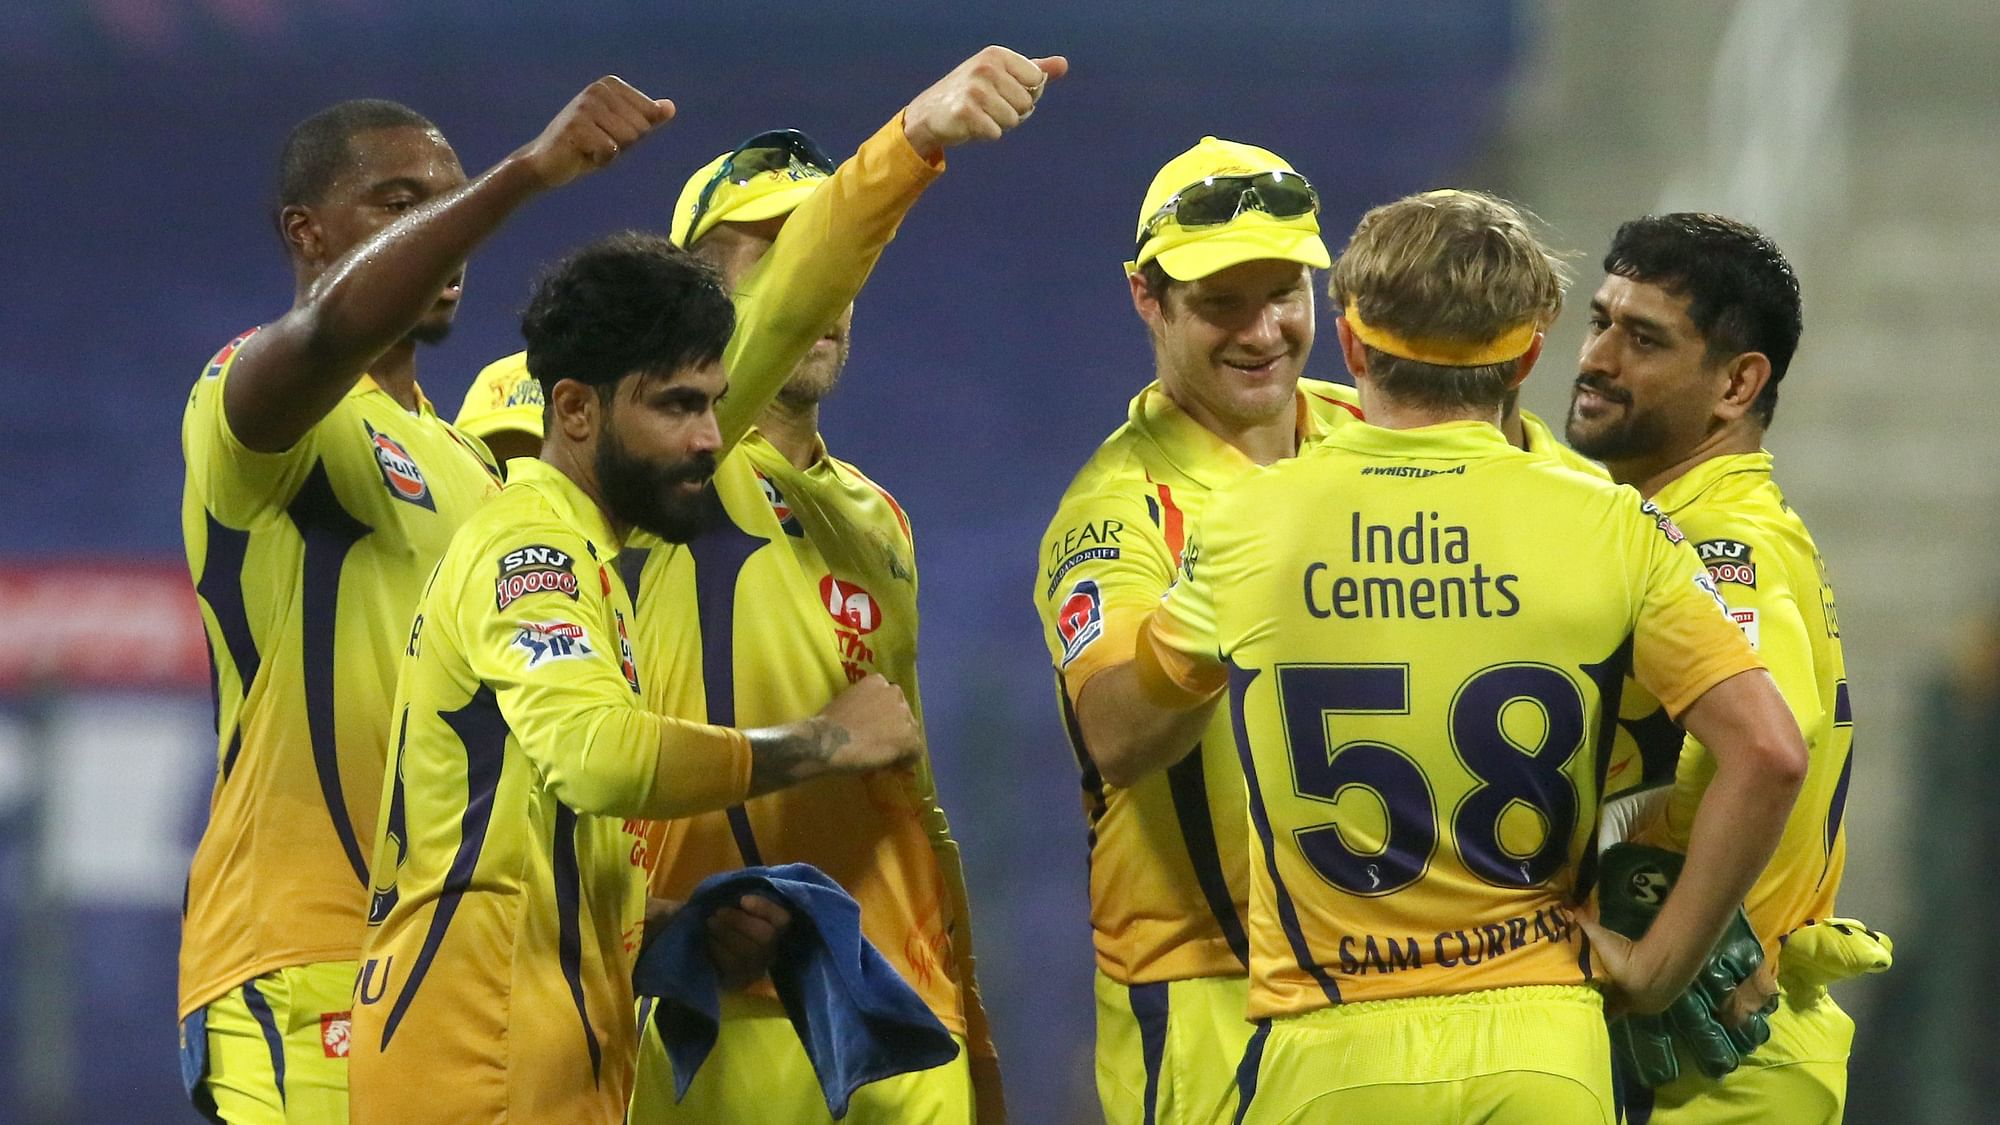 IPL 2020: Mumbai Indians posted a 162/9 against Chennai Super Kings in the opening match of the Indian Premier League.